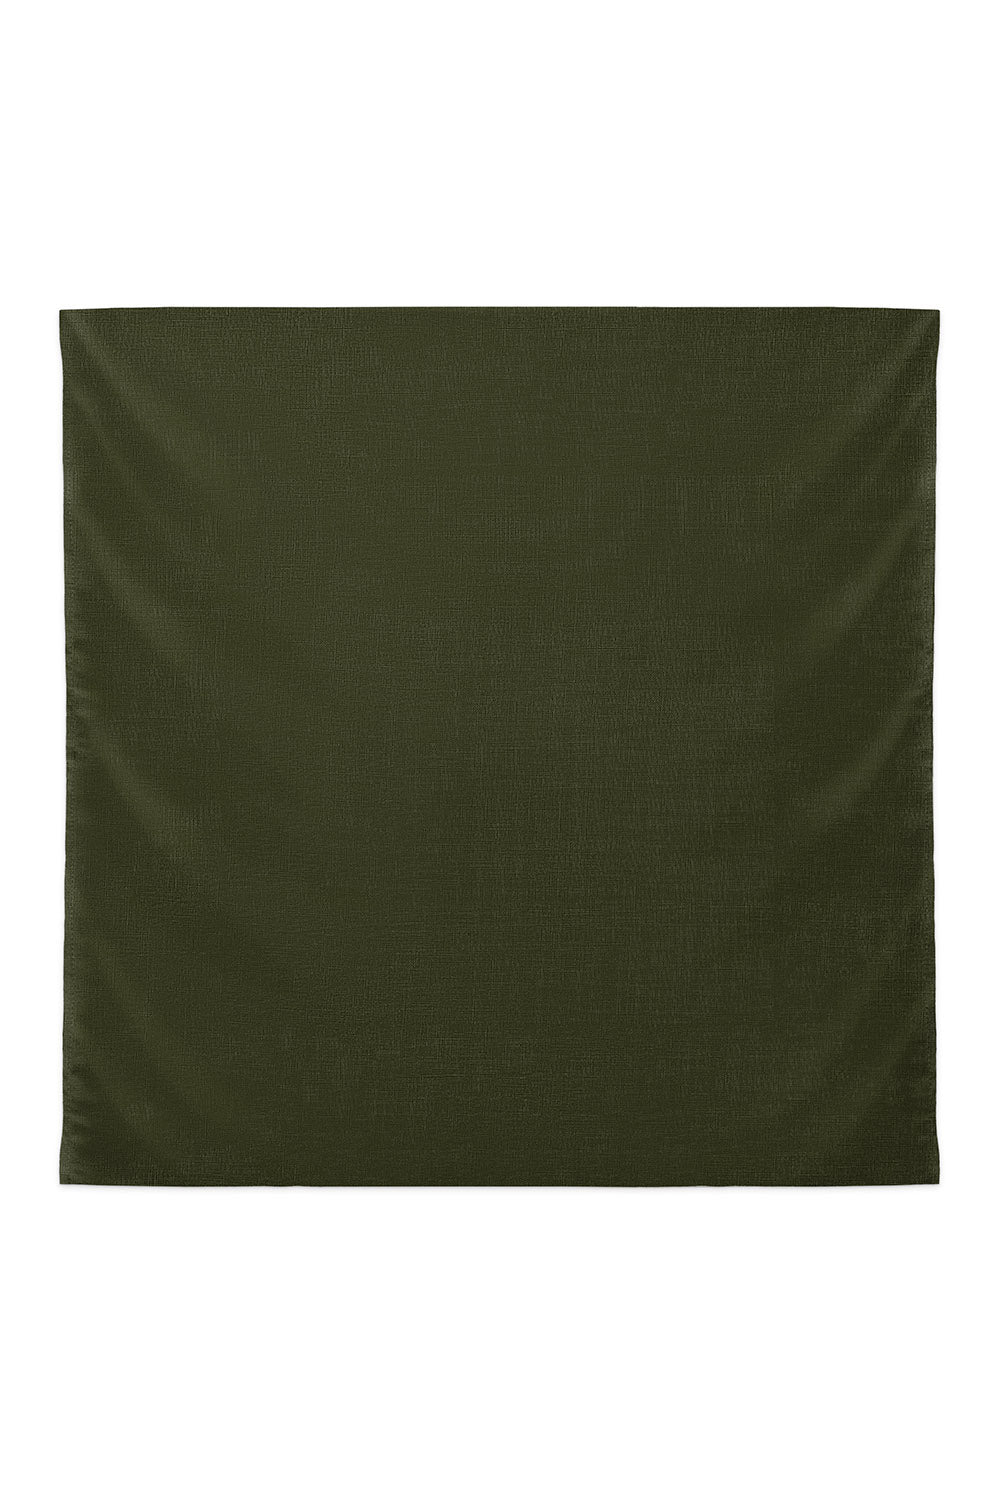 RR Basic Cotton Scarf in Olive